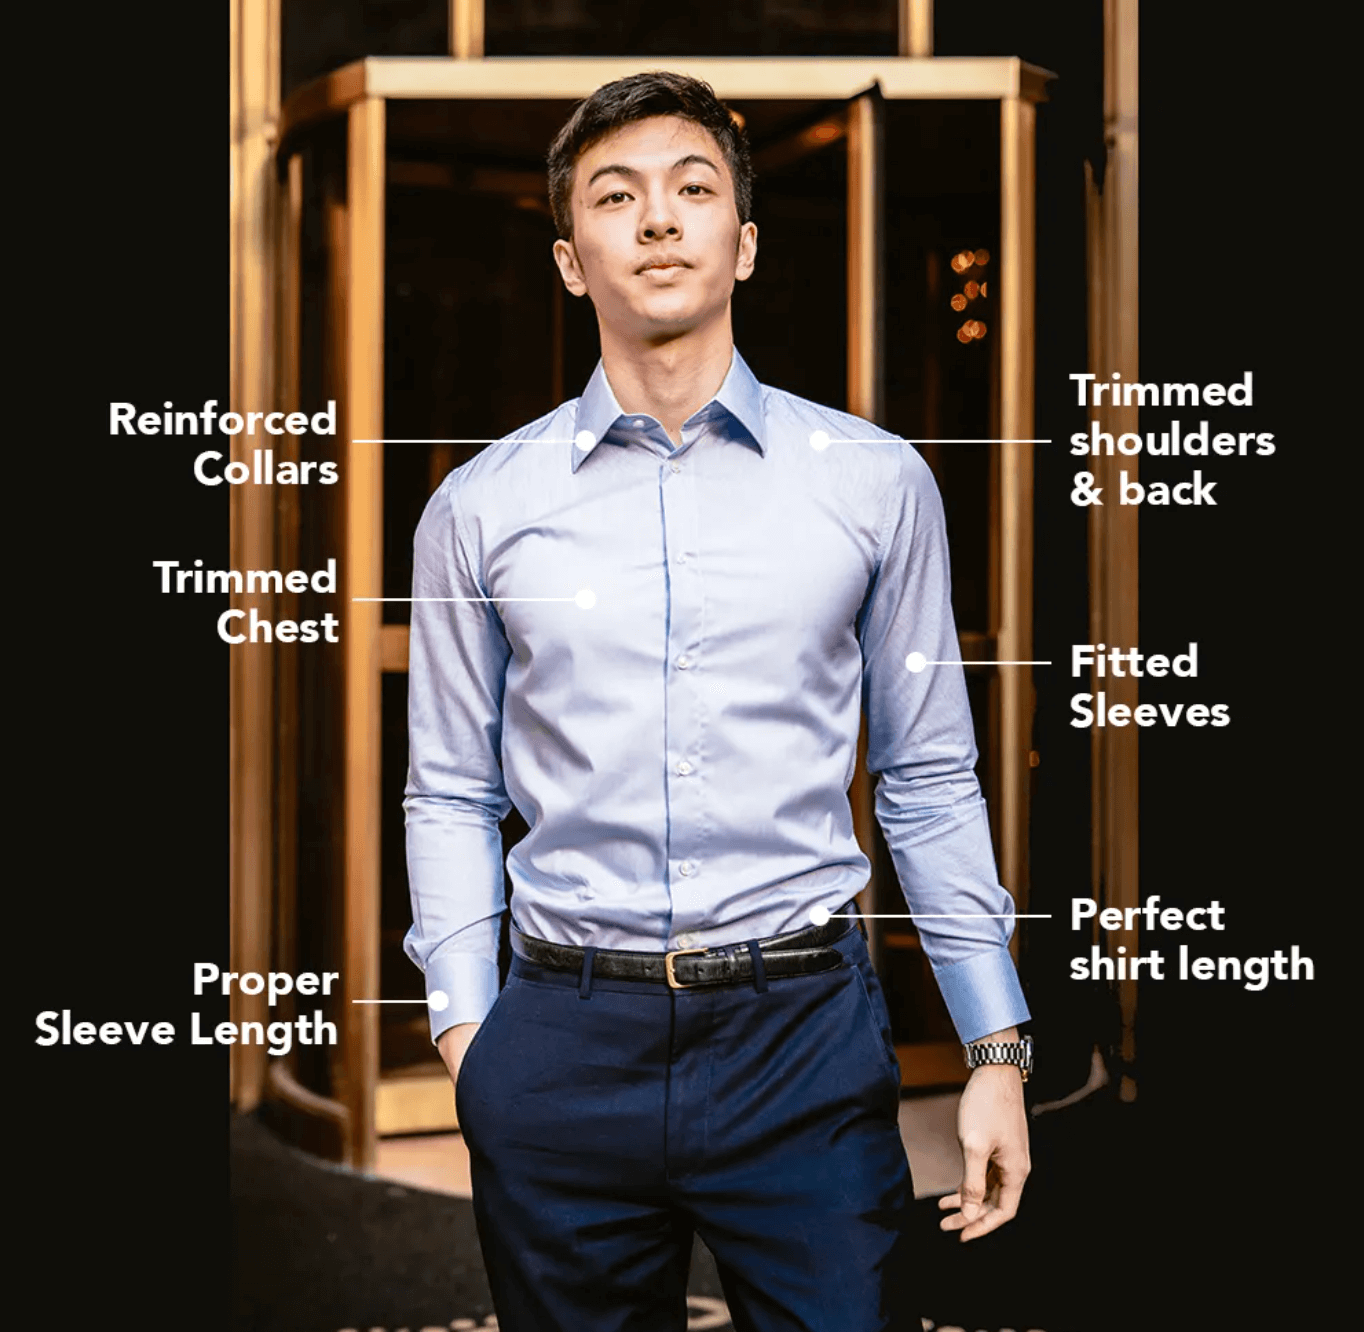 nimble made visual infographic of their actually slim fit